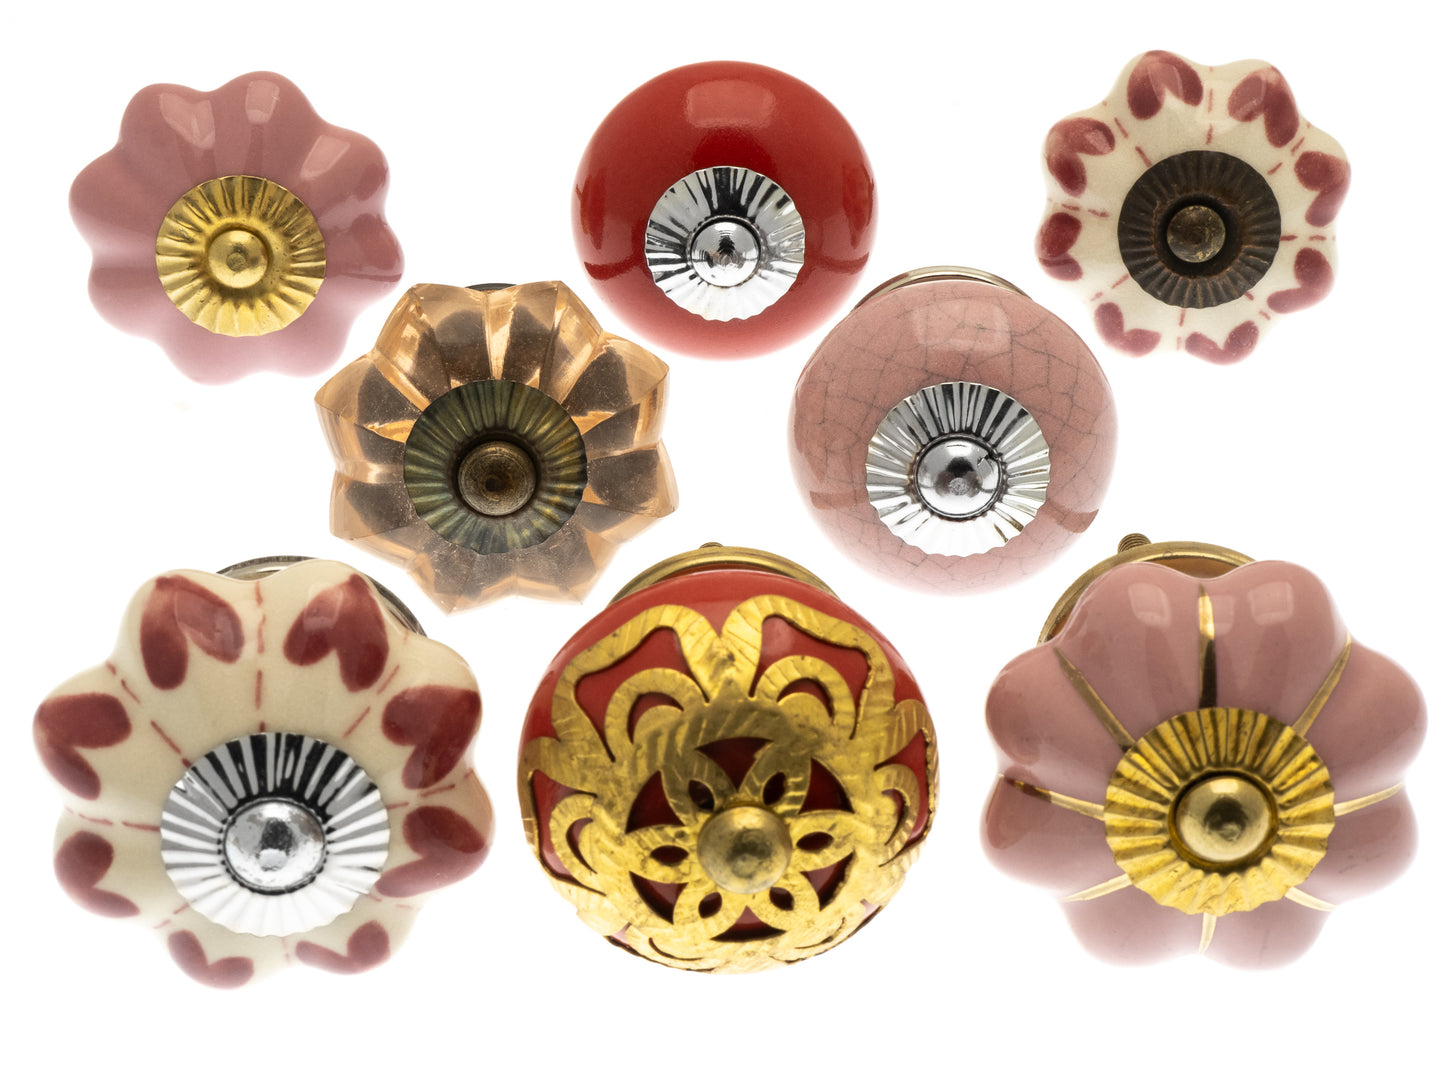 Ceramic and Glass Cupboard Door Knobs in 10 Pink and Red Designs